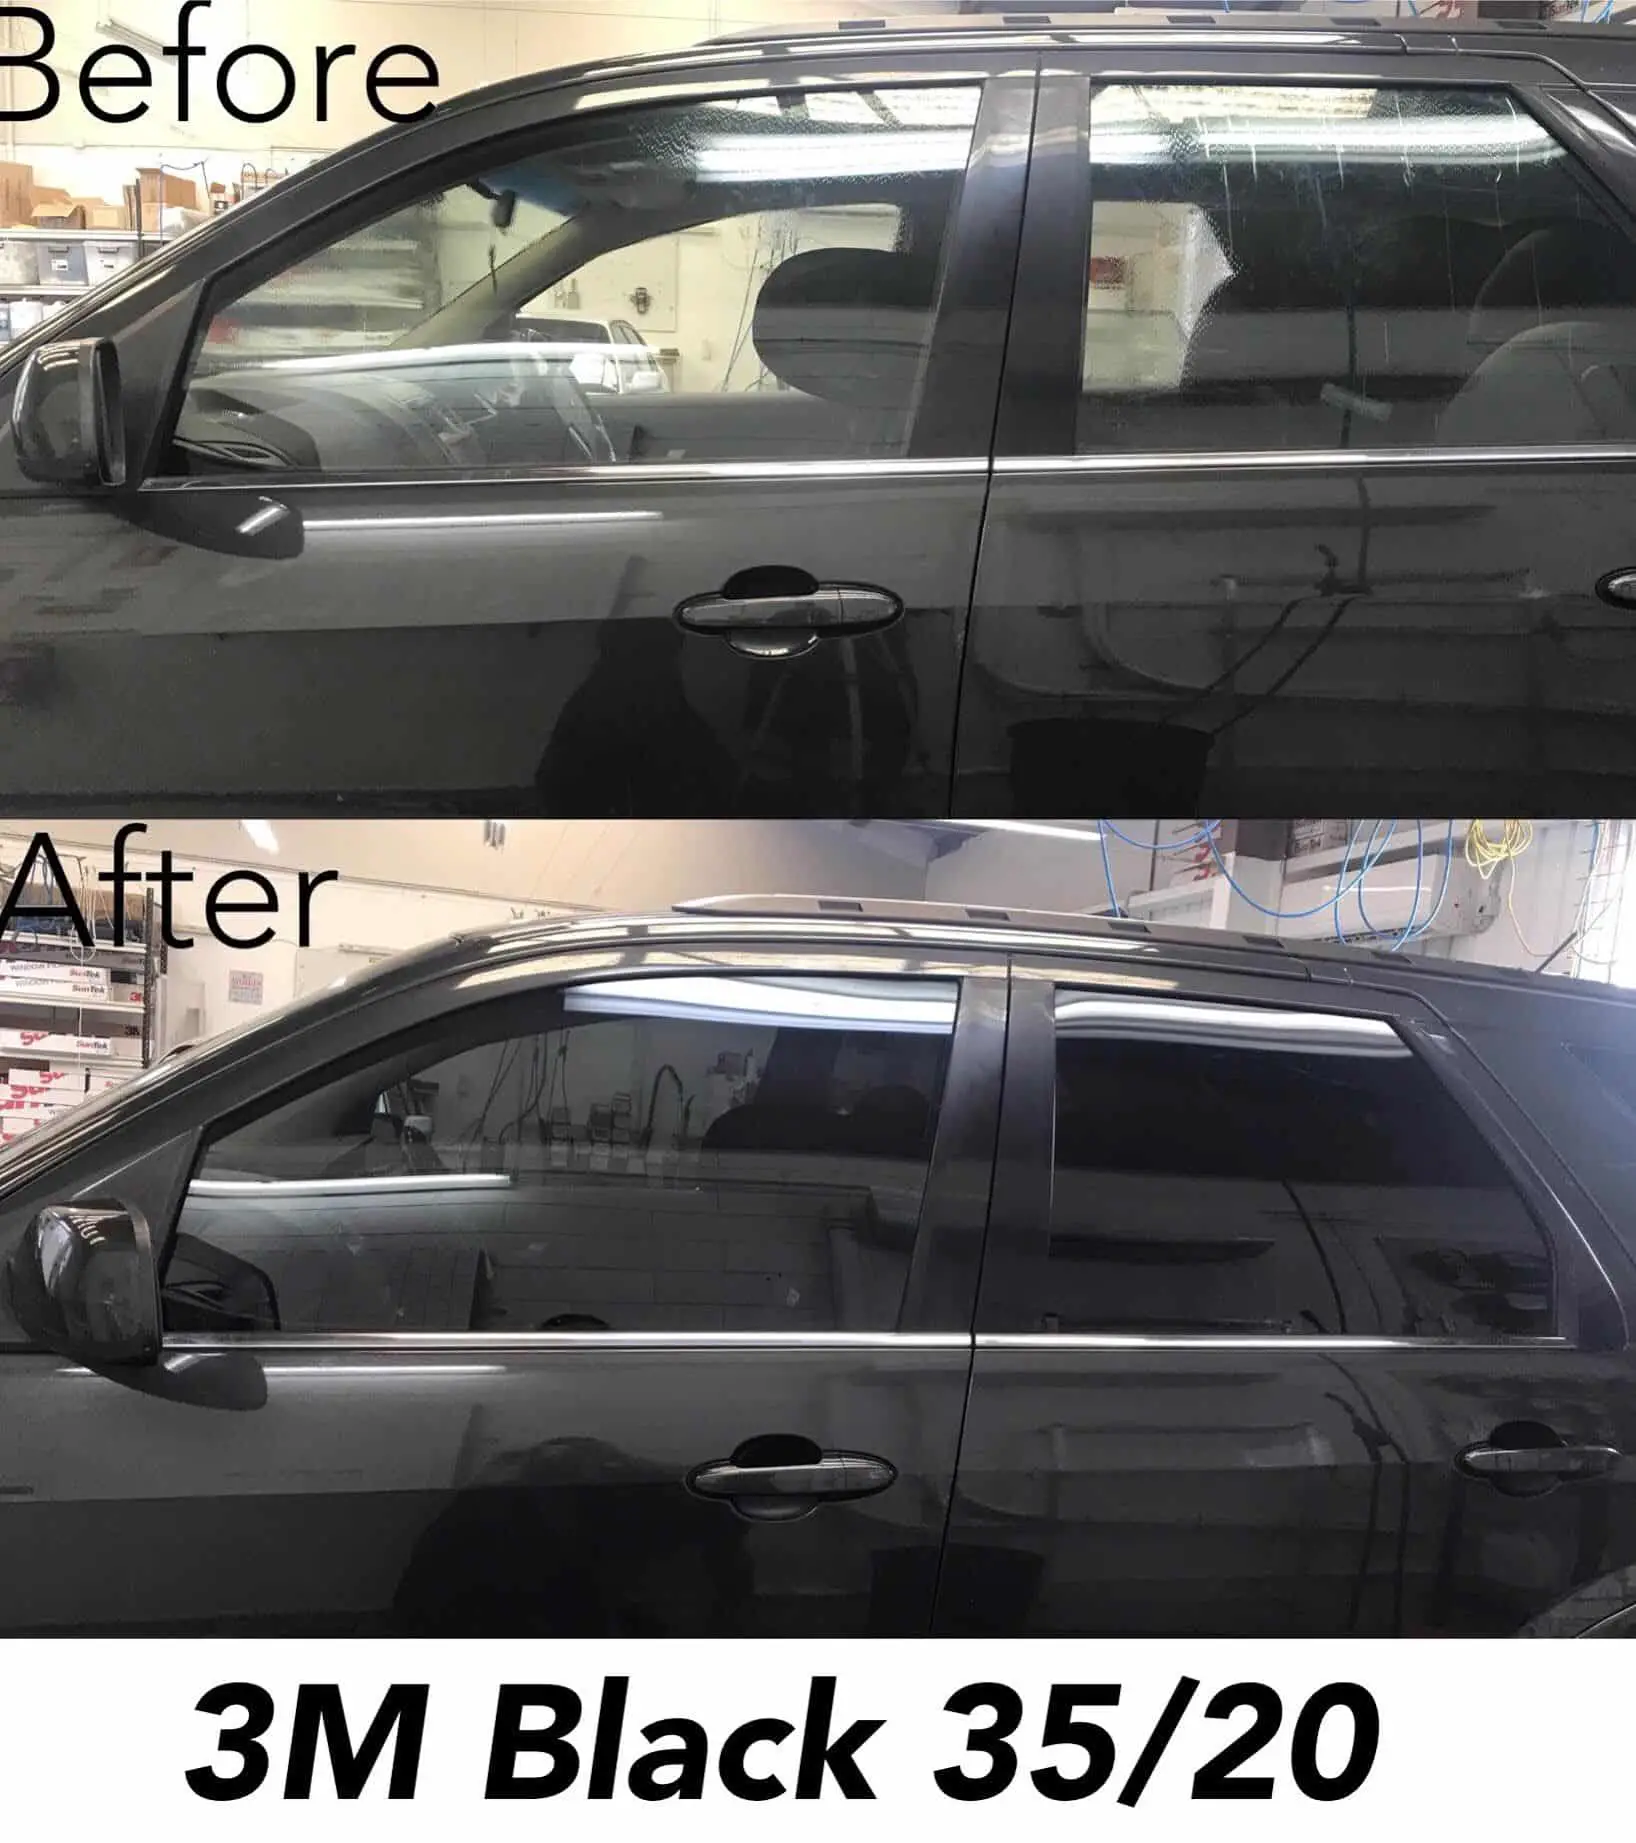 3M Black window tint 35/20 before and after photos Ford Territory ...